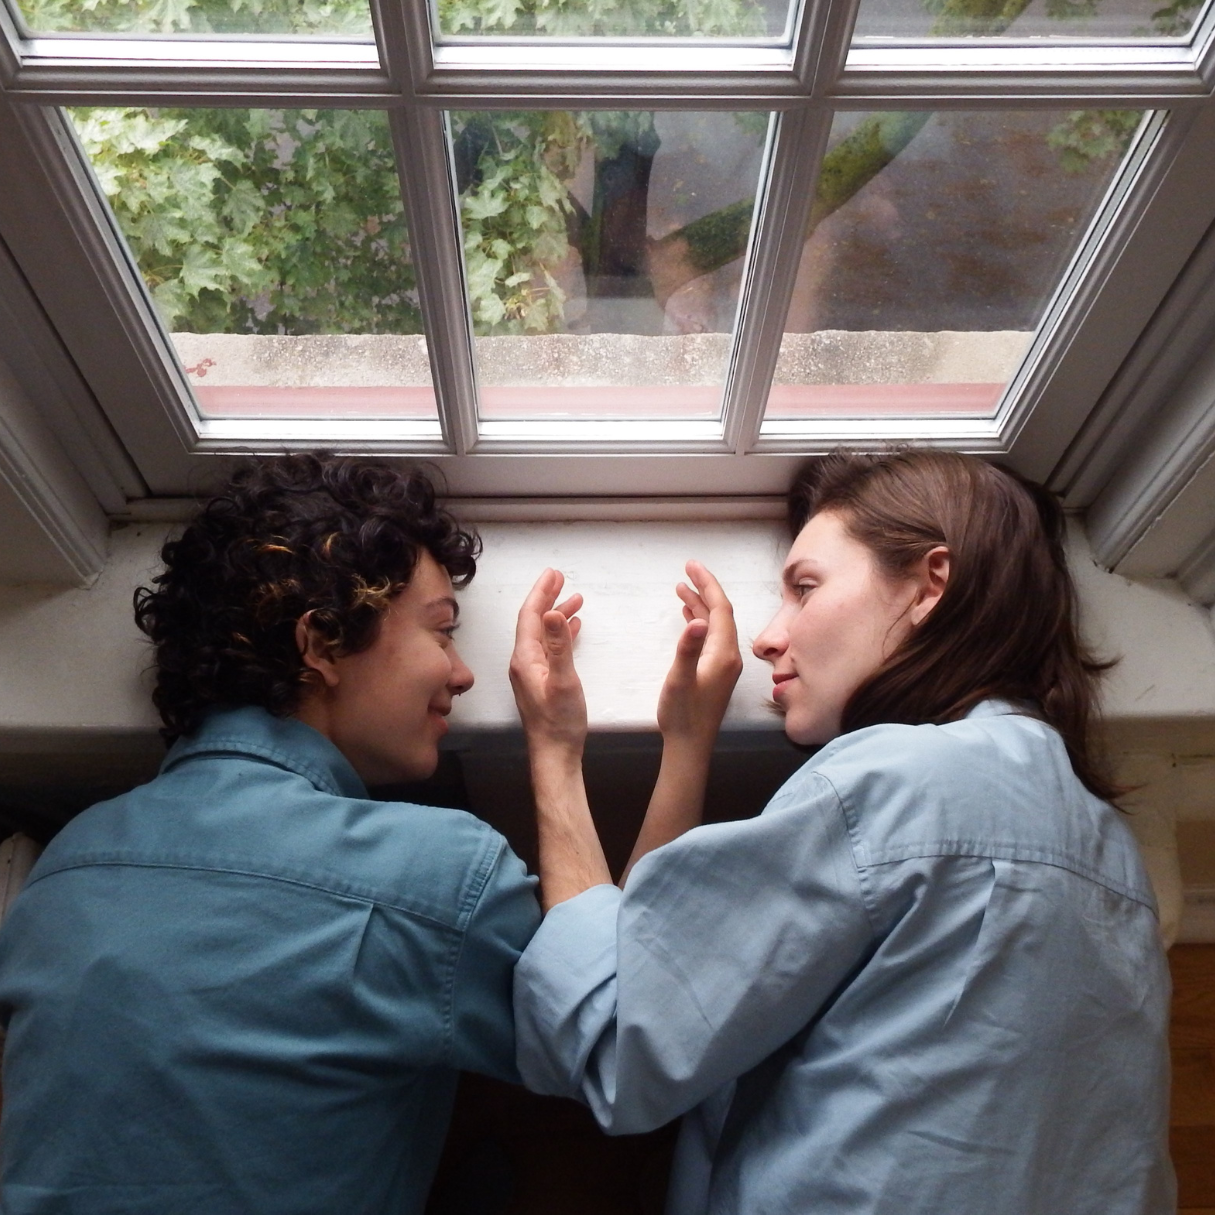 Two dancers are captured by camera from above. They lay facing each other with their heads resting on a white windowsill. The dancers are softly smiling, holding their hands out with the backs of their palms in front of each other’s noses. Both dancers are wearing collared teal shirts, one lighter and one darker. The dancer on the left has short, curly dark brown hair; the dancer on the right has shoulder length straight brown hair.